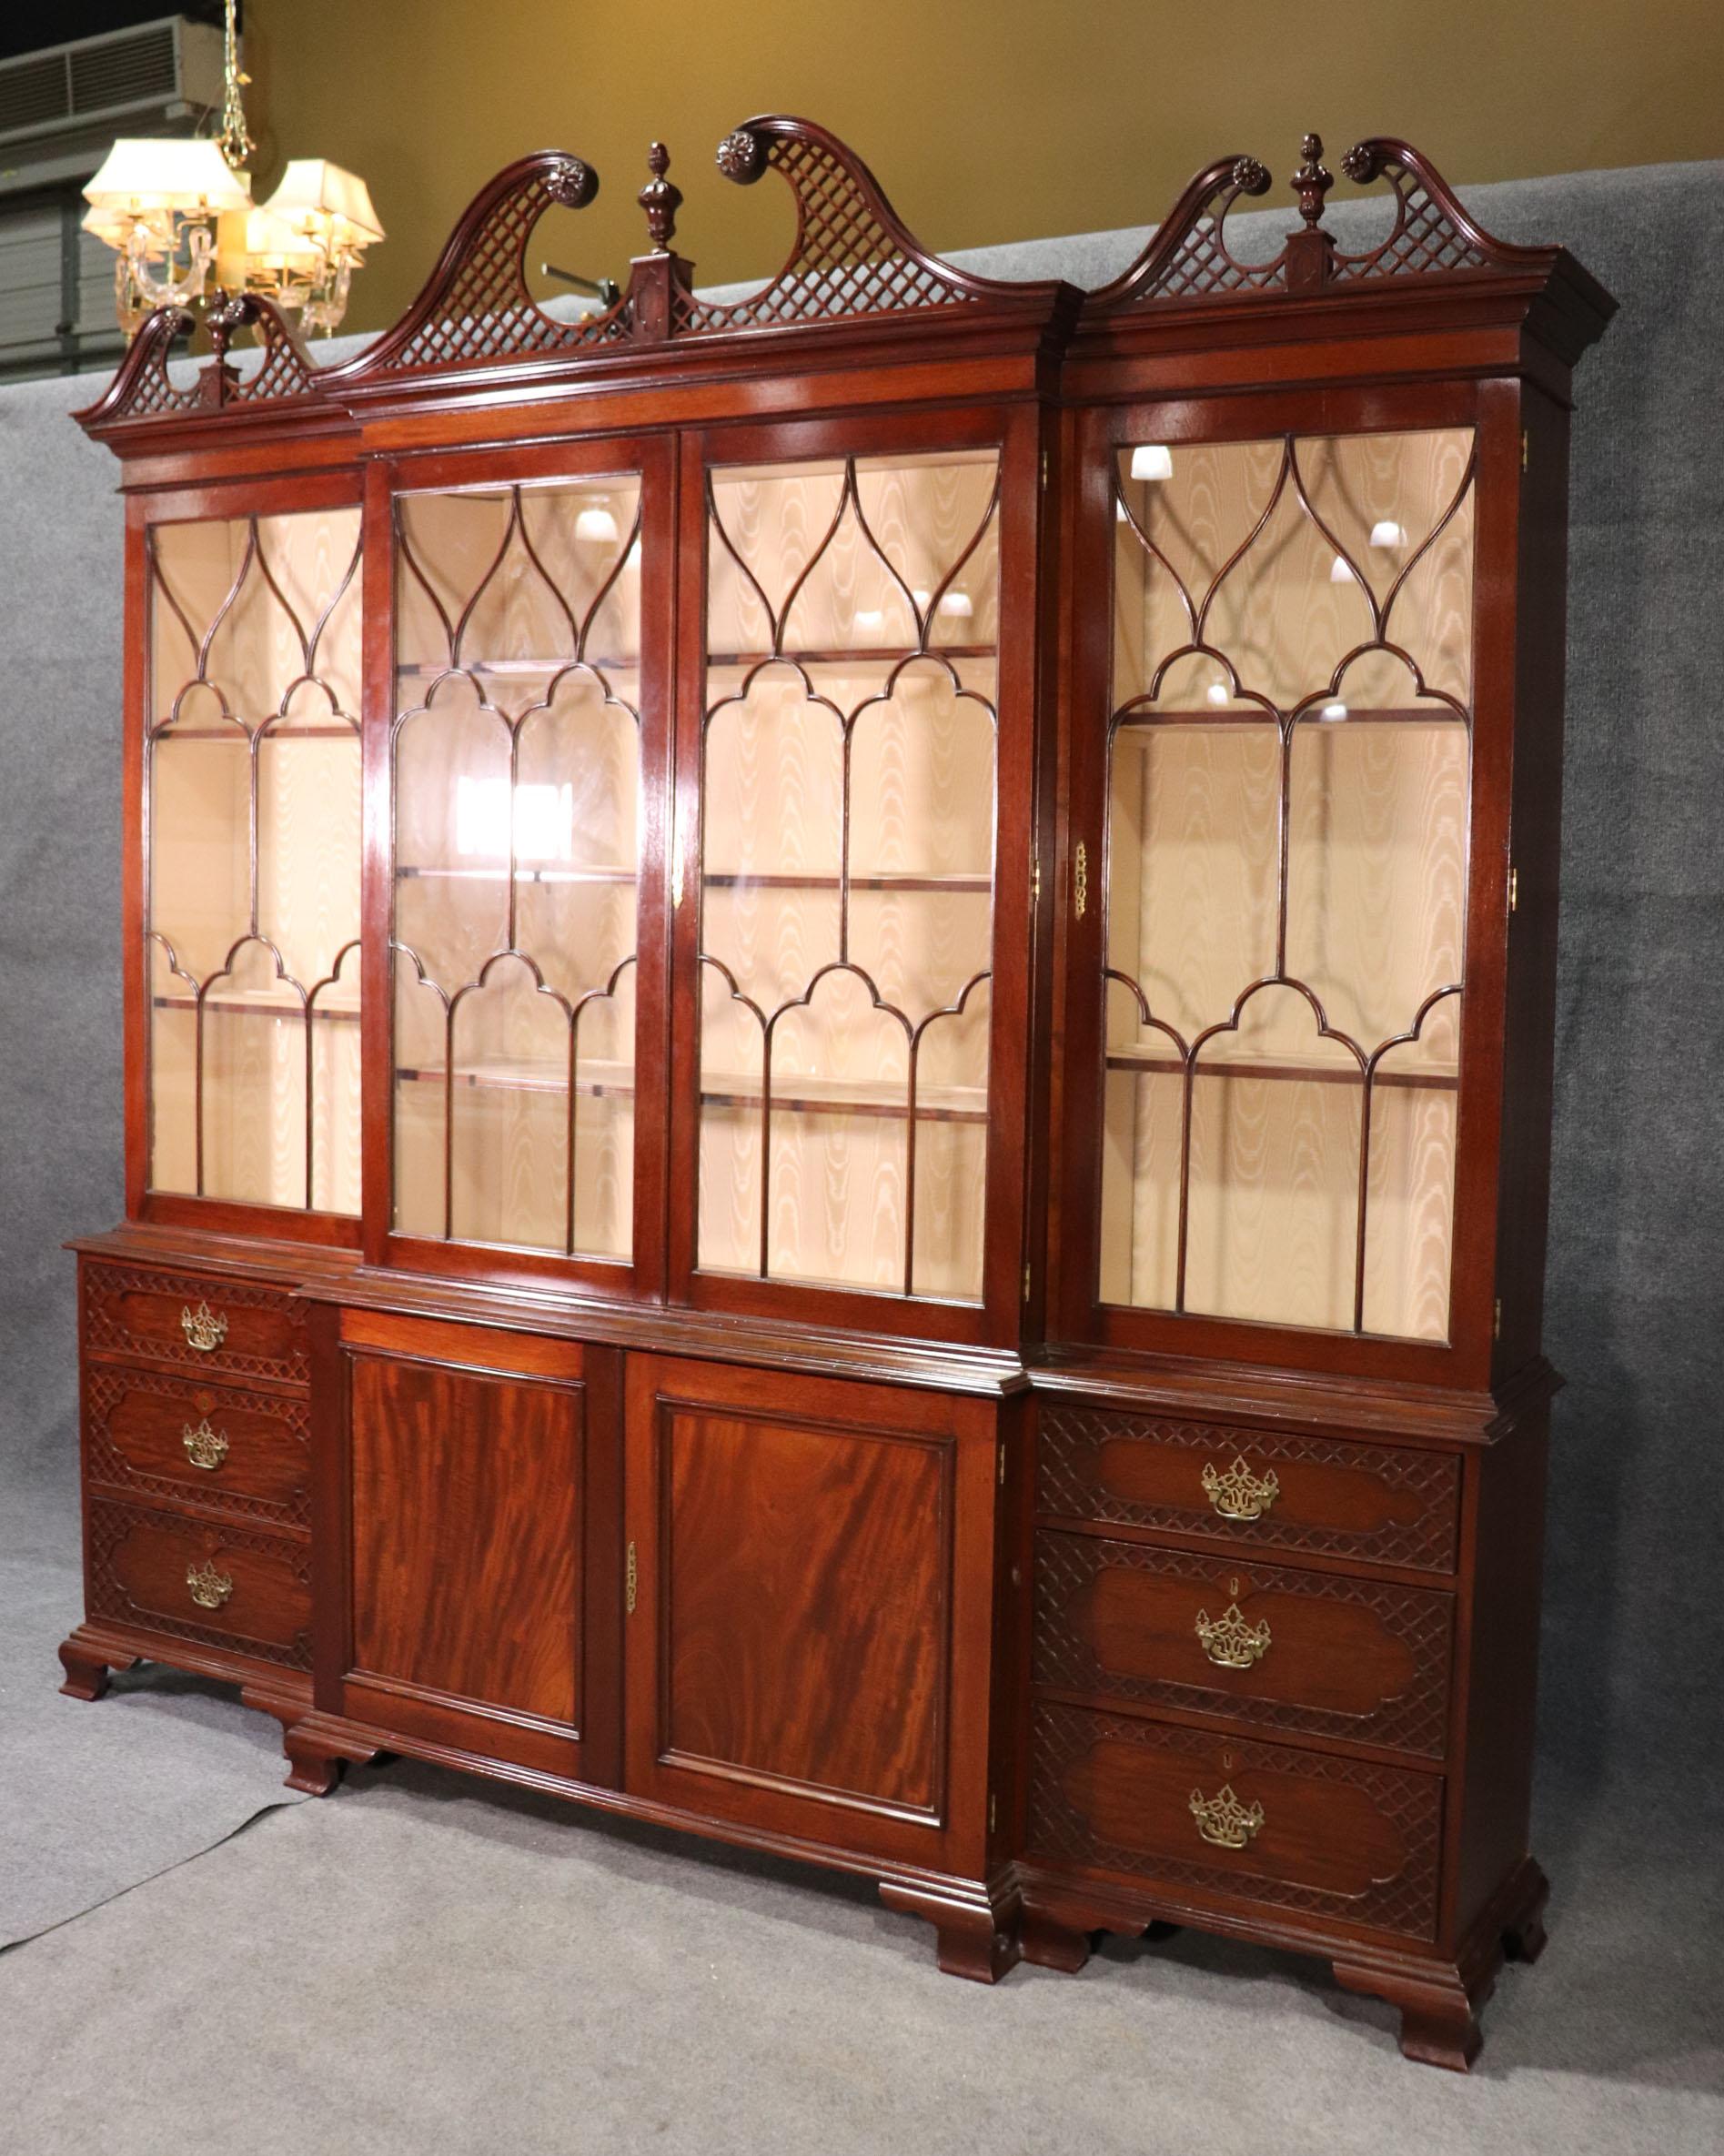 This incredible breakfront is solid mahogany and custom made so it can be broken down into much smaller sections allowing for easy moving and assembly inside any home, no matter what encumbrances may stand it the way of normal larger sized pieces.